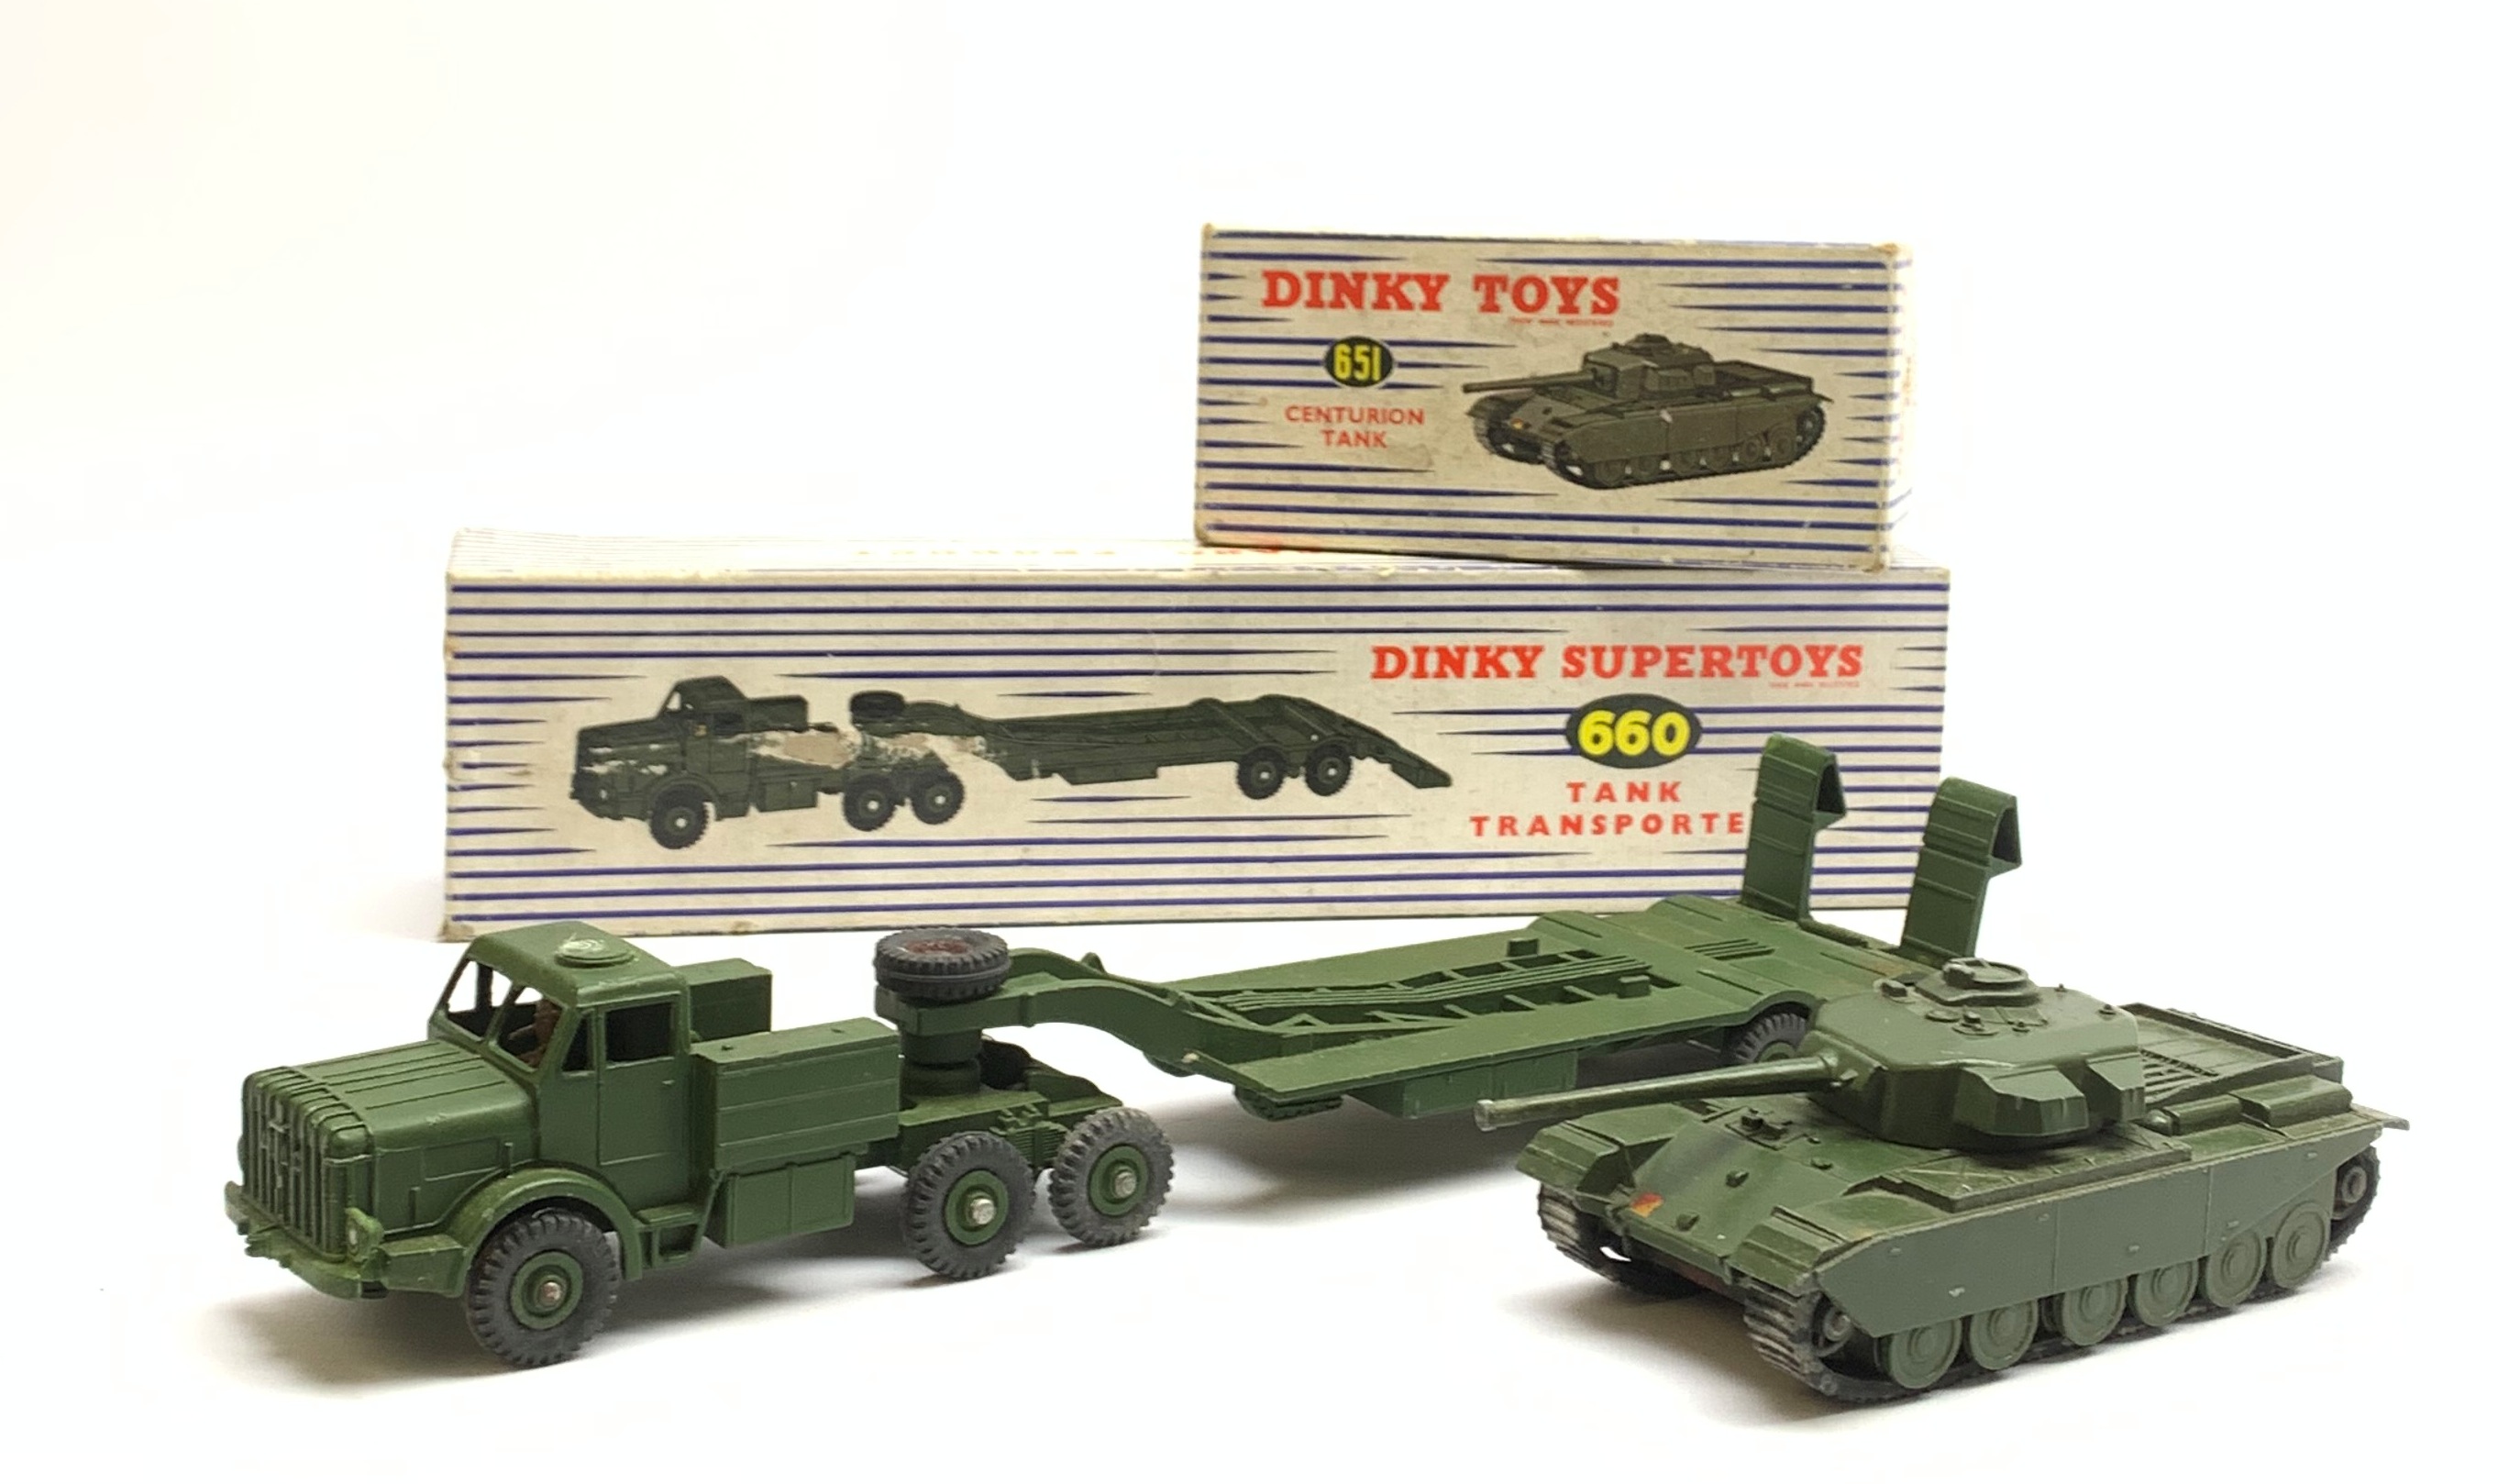 Dinky Supertoys- Thornycroft Mighty Antar Tank Transporter No.660 in box with internal packaging, an